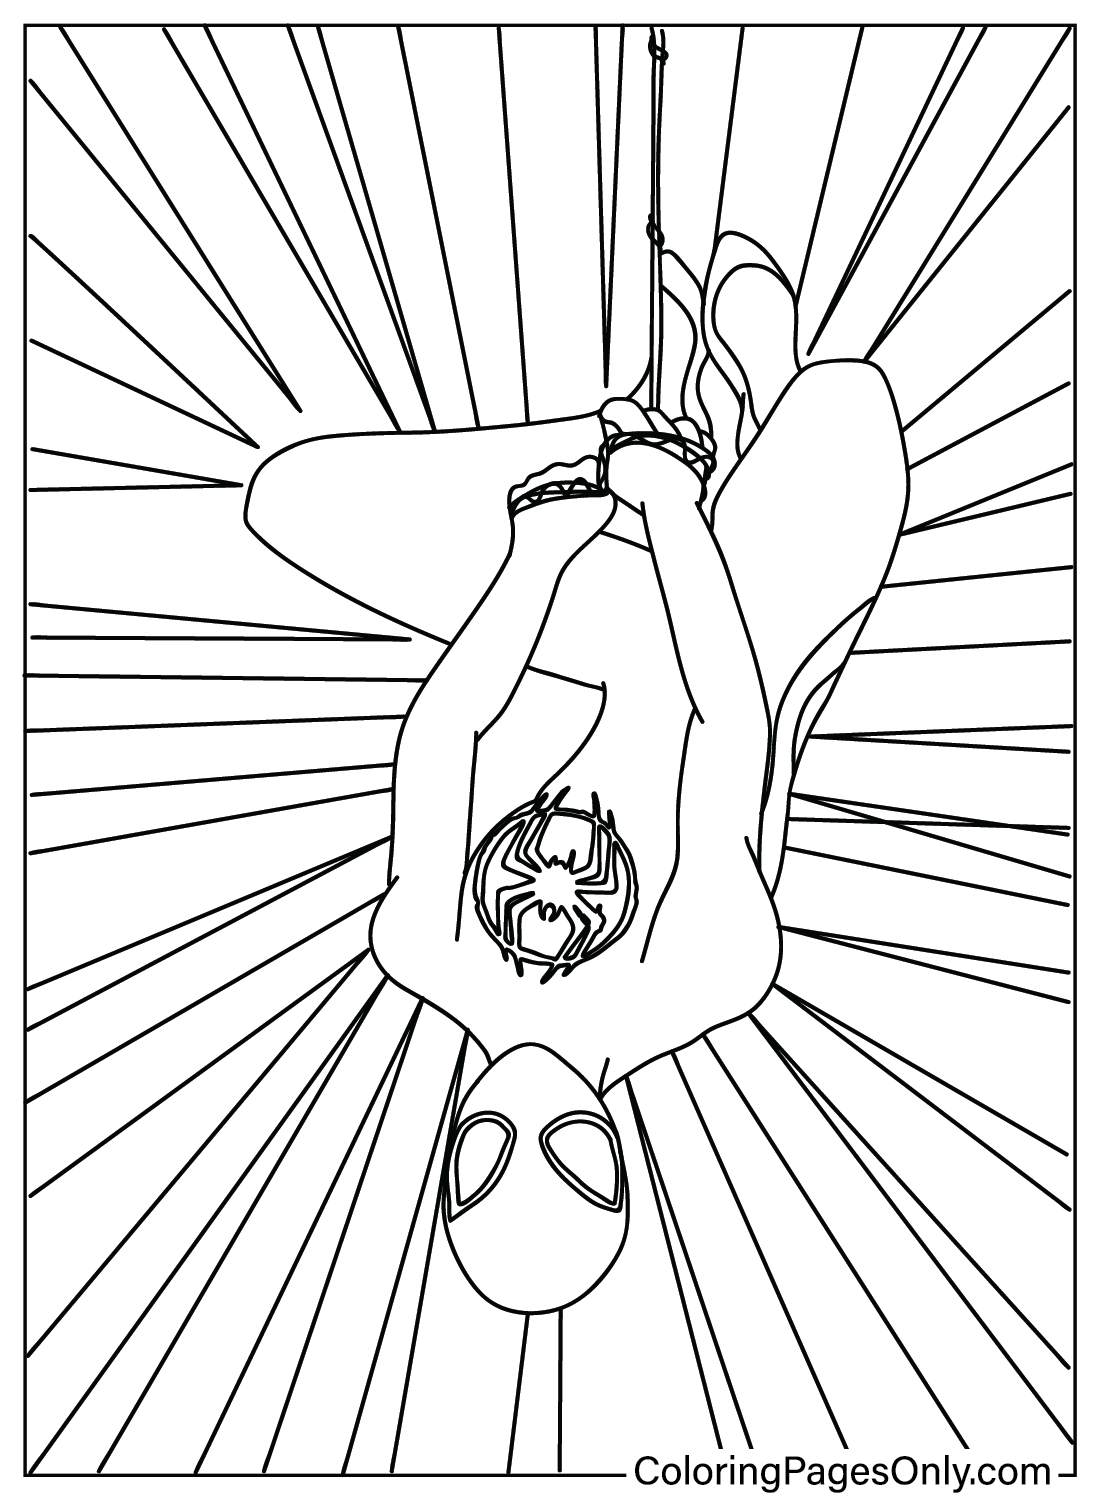 Spider-Man Across the Spider Coloring Pages to Download from Spider-Man: Across the Spider